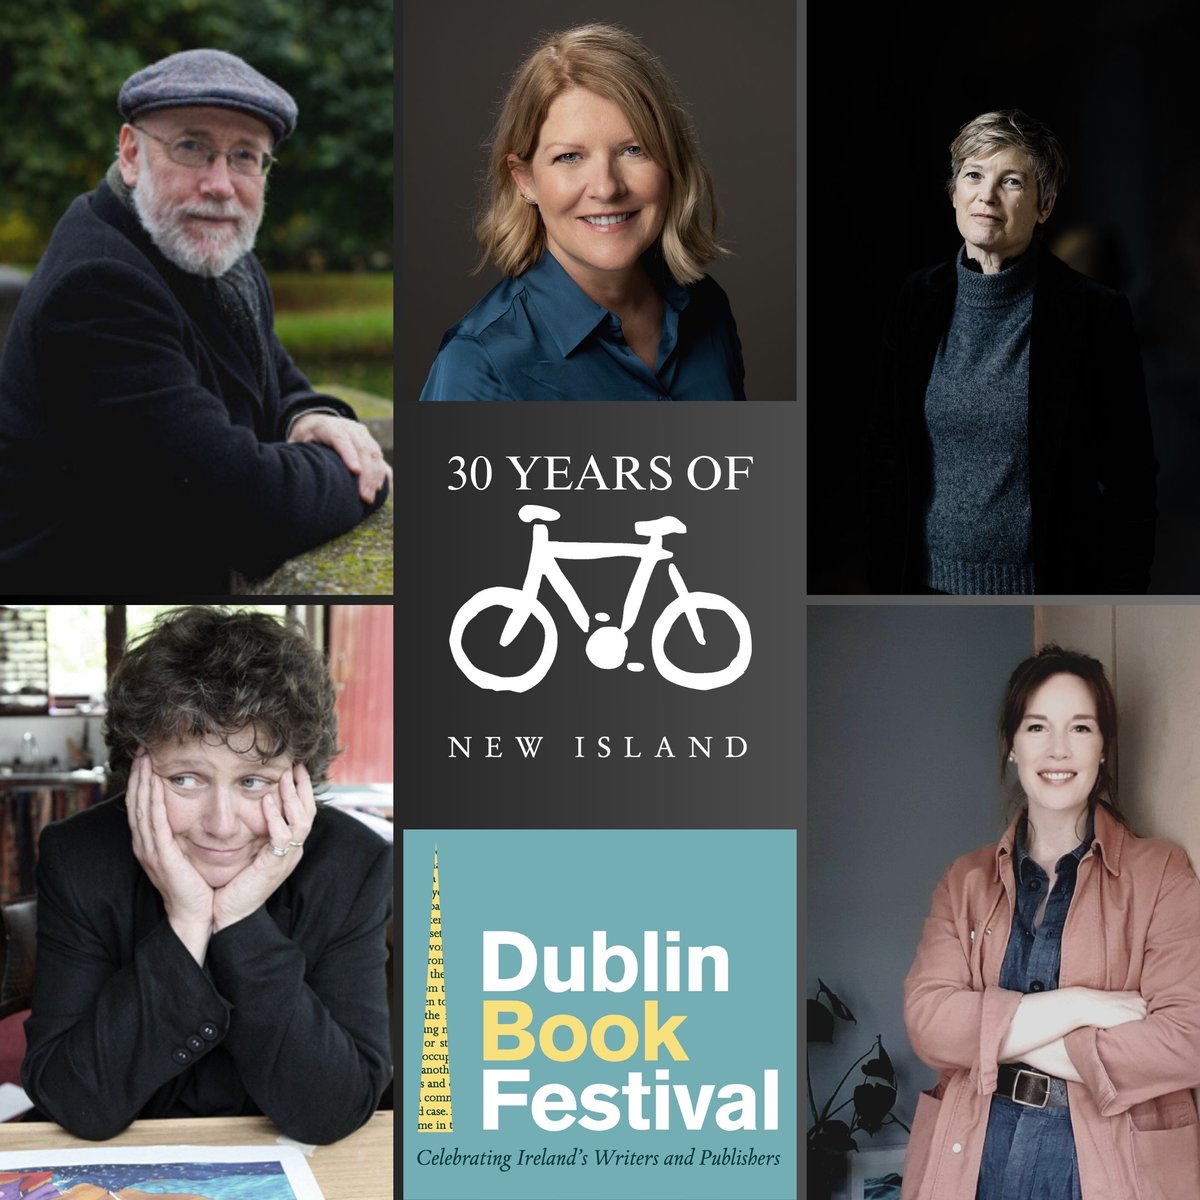 Don’t miss our 30th anniversary event as part of the @DublinBookFest this Sat 11th Nov at 6.30pm in The Printworks. Line-up includes Dermot Bolger, Aoife K. Walsh, Annie West, Katherine O'Donnell with Flor MacCarthy. Event is free but reg necessary bit.ly/49lFGkz #dbf23